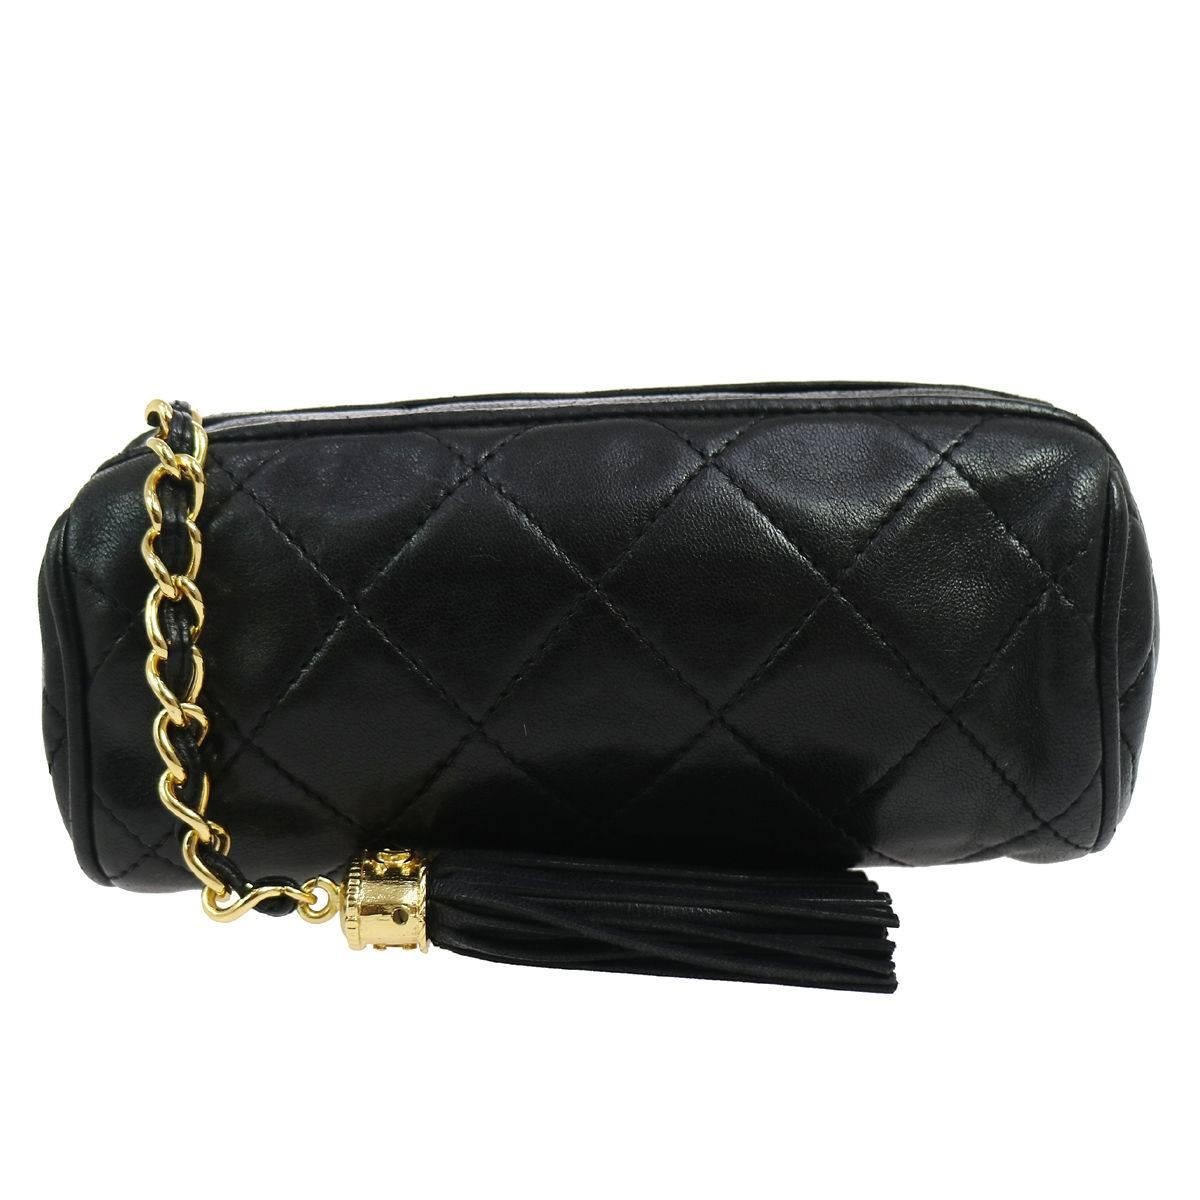 Chanel Black Leather Small Party Evening Barrel Clutch Bag in Box